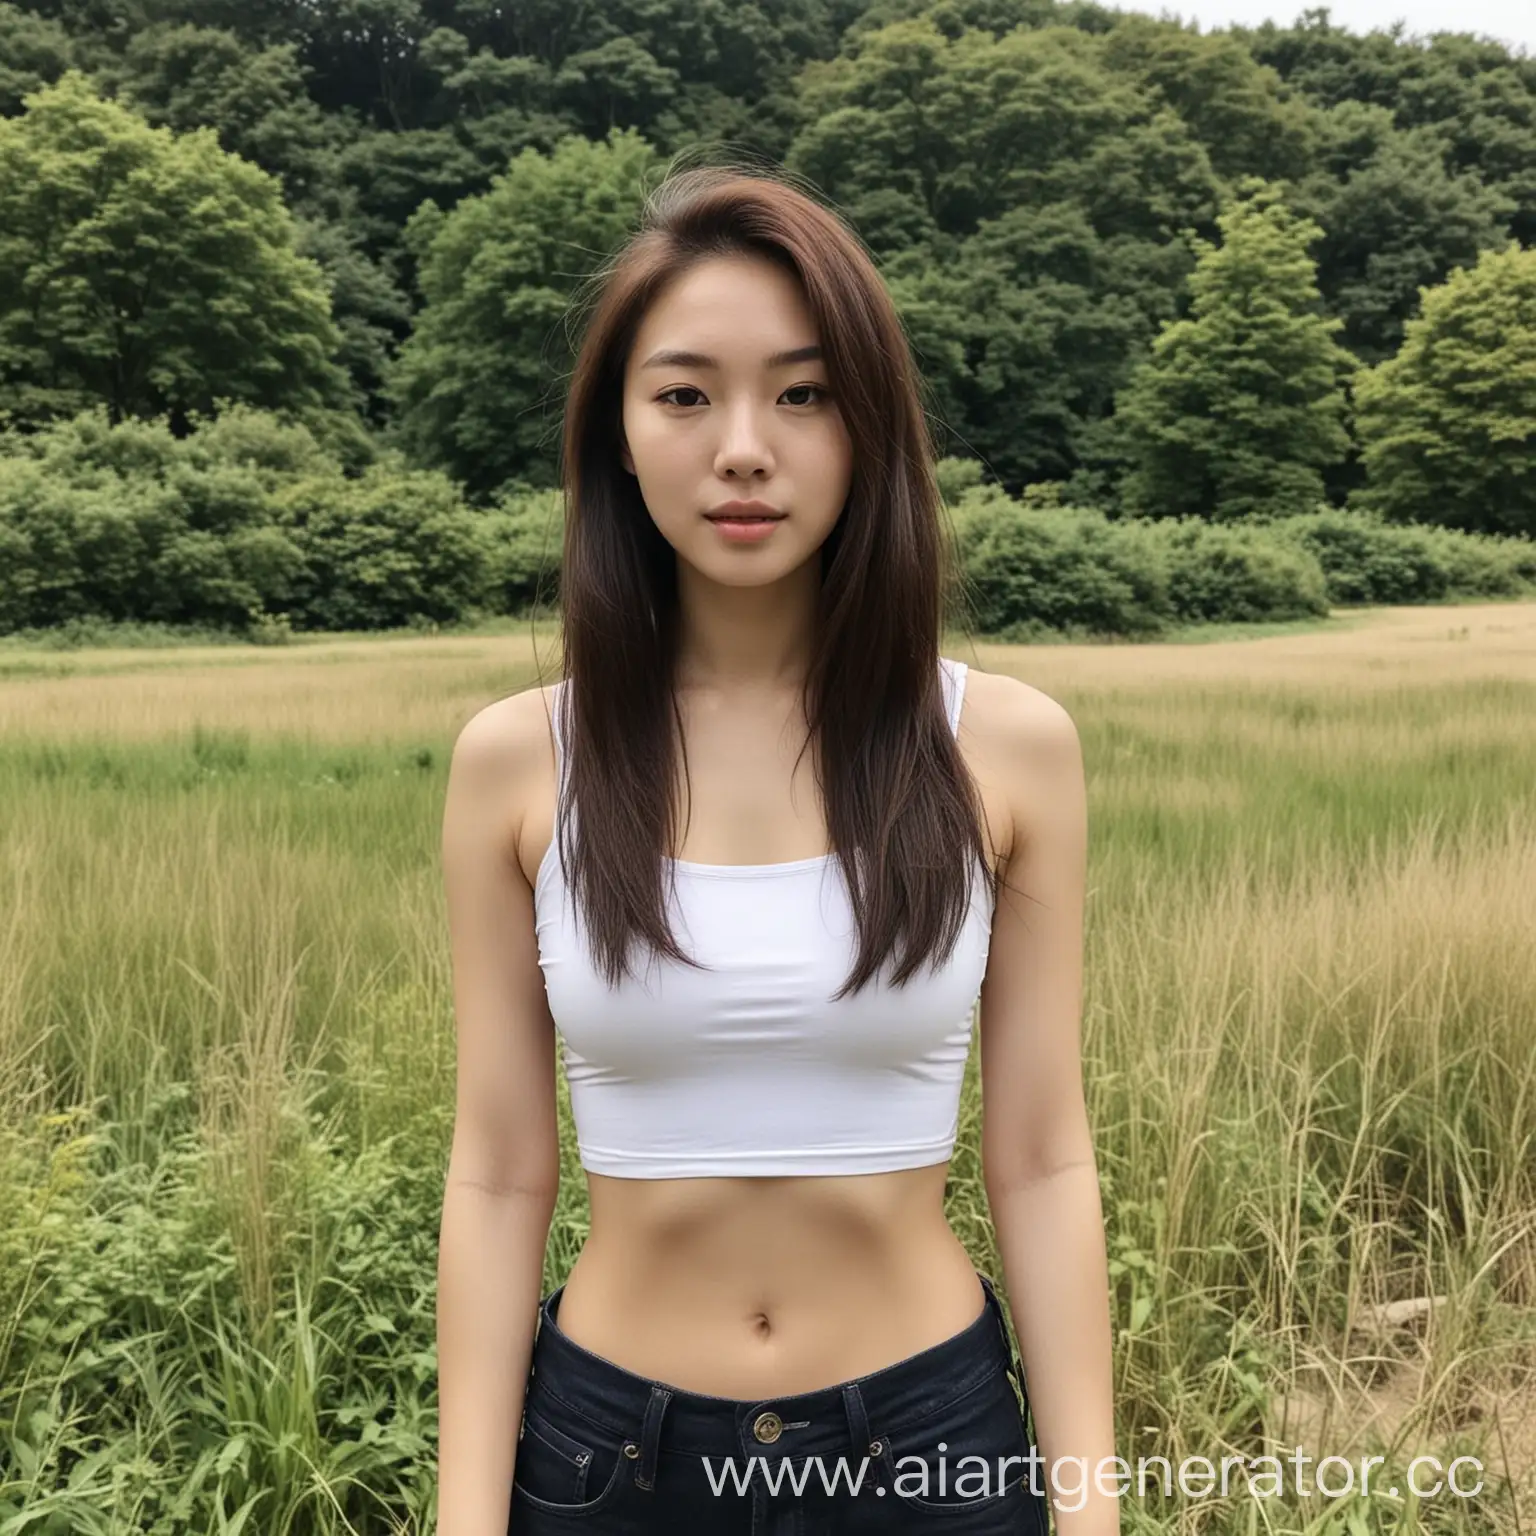 Make realistic iphone taken photo of Korean mixed white girl with good body in UK, show a landscape or popular spot in UK
